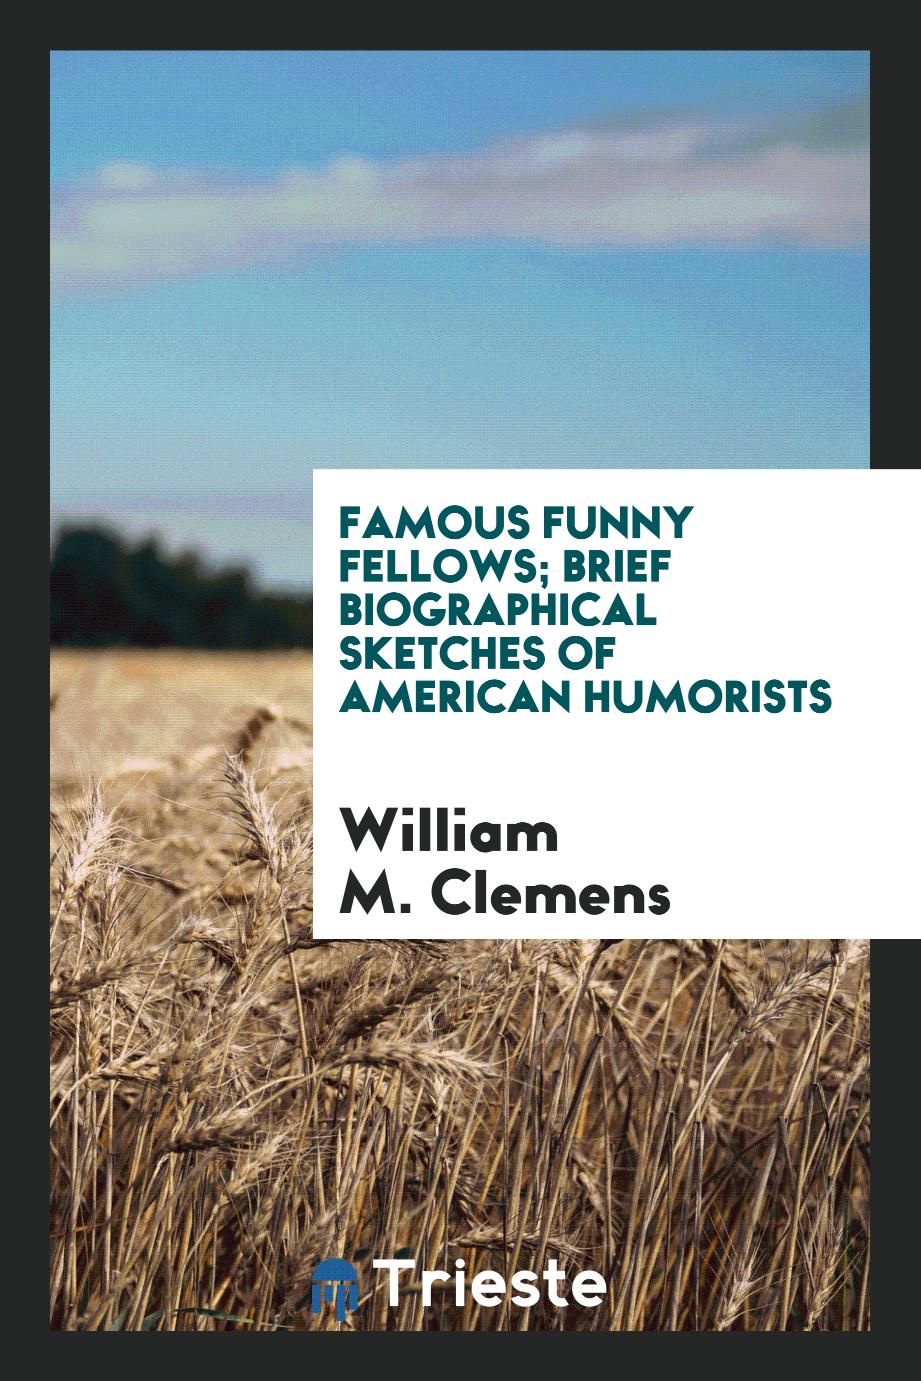 Famous funny fellows; brief biographical sketches of American humorists